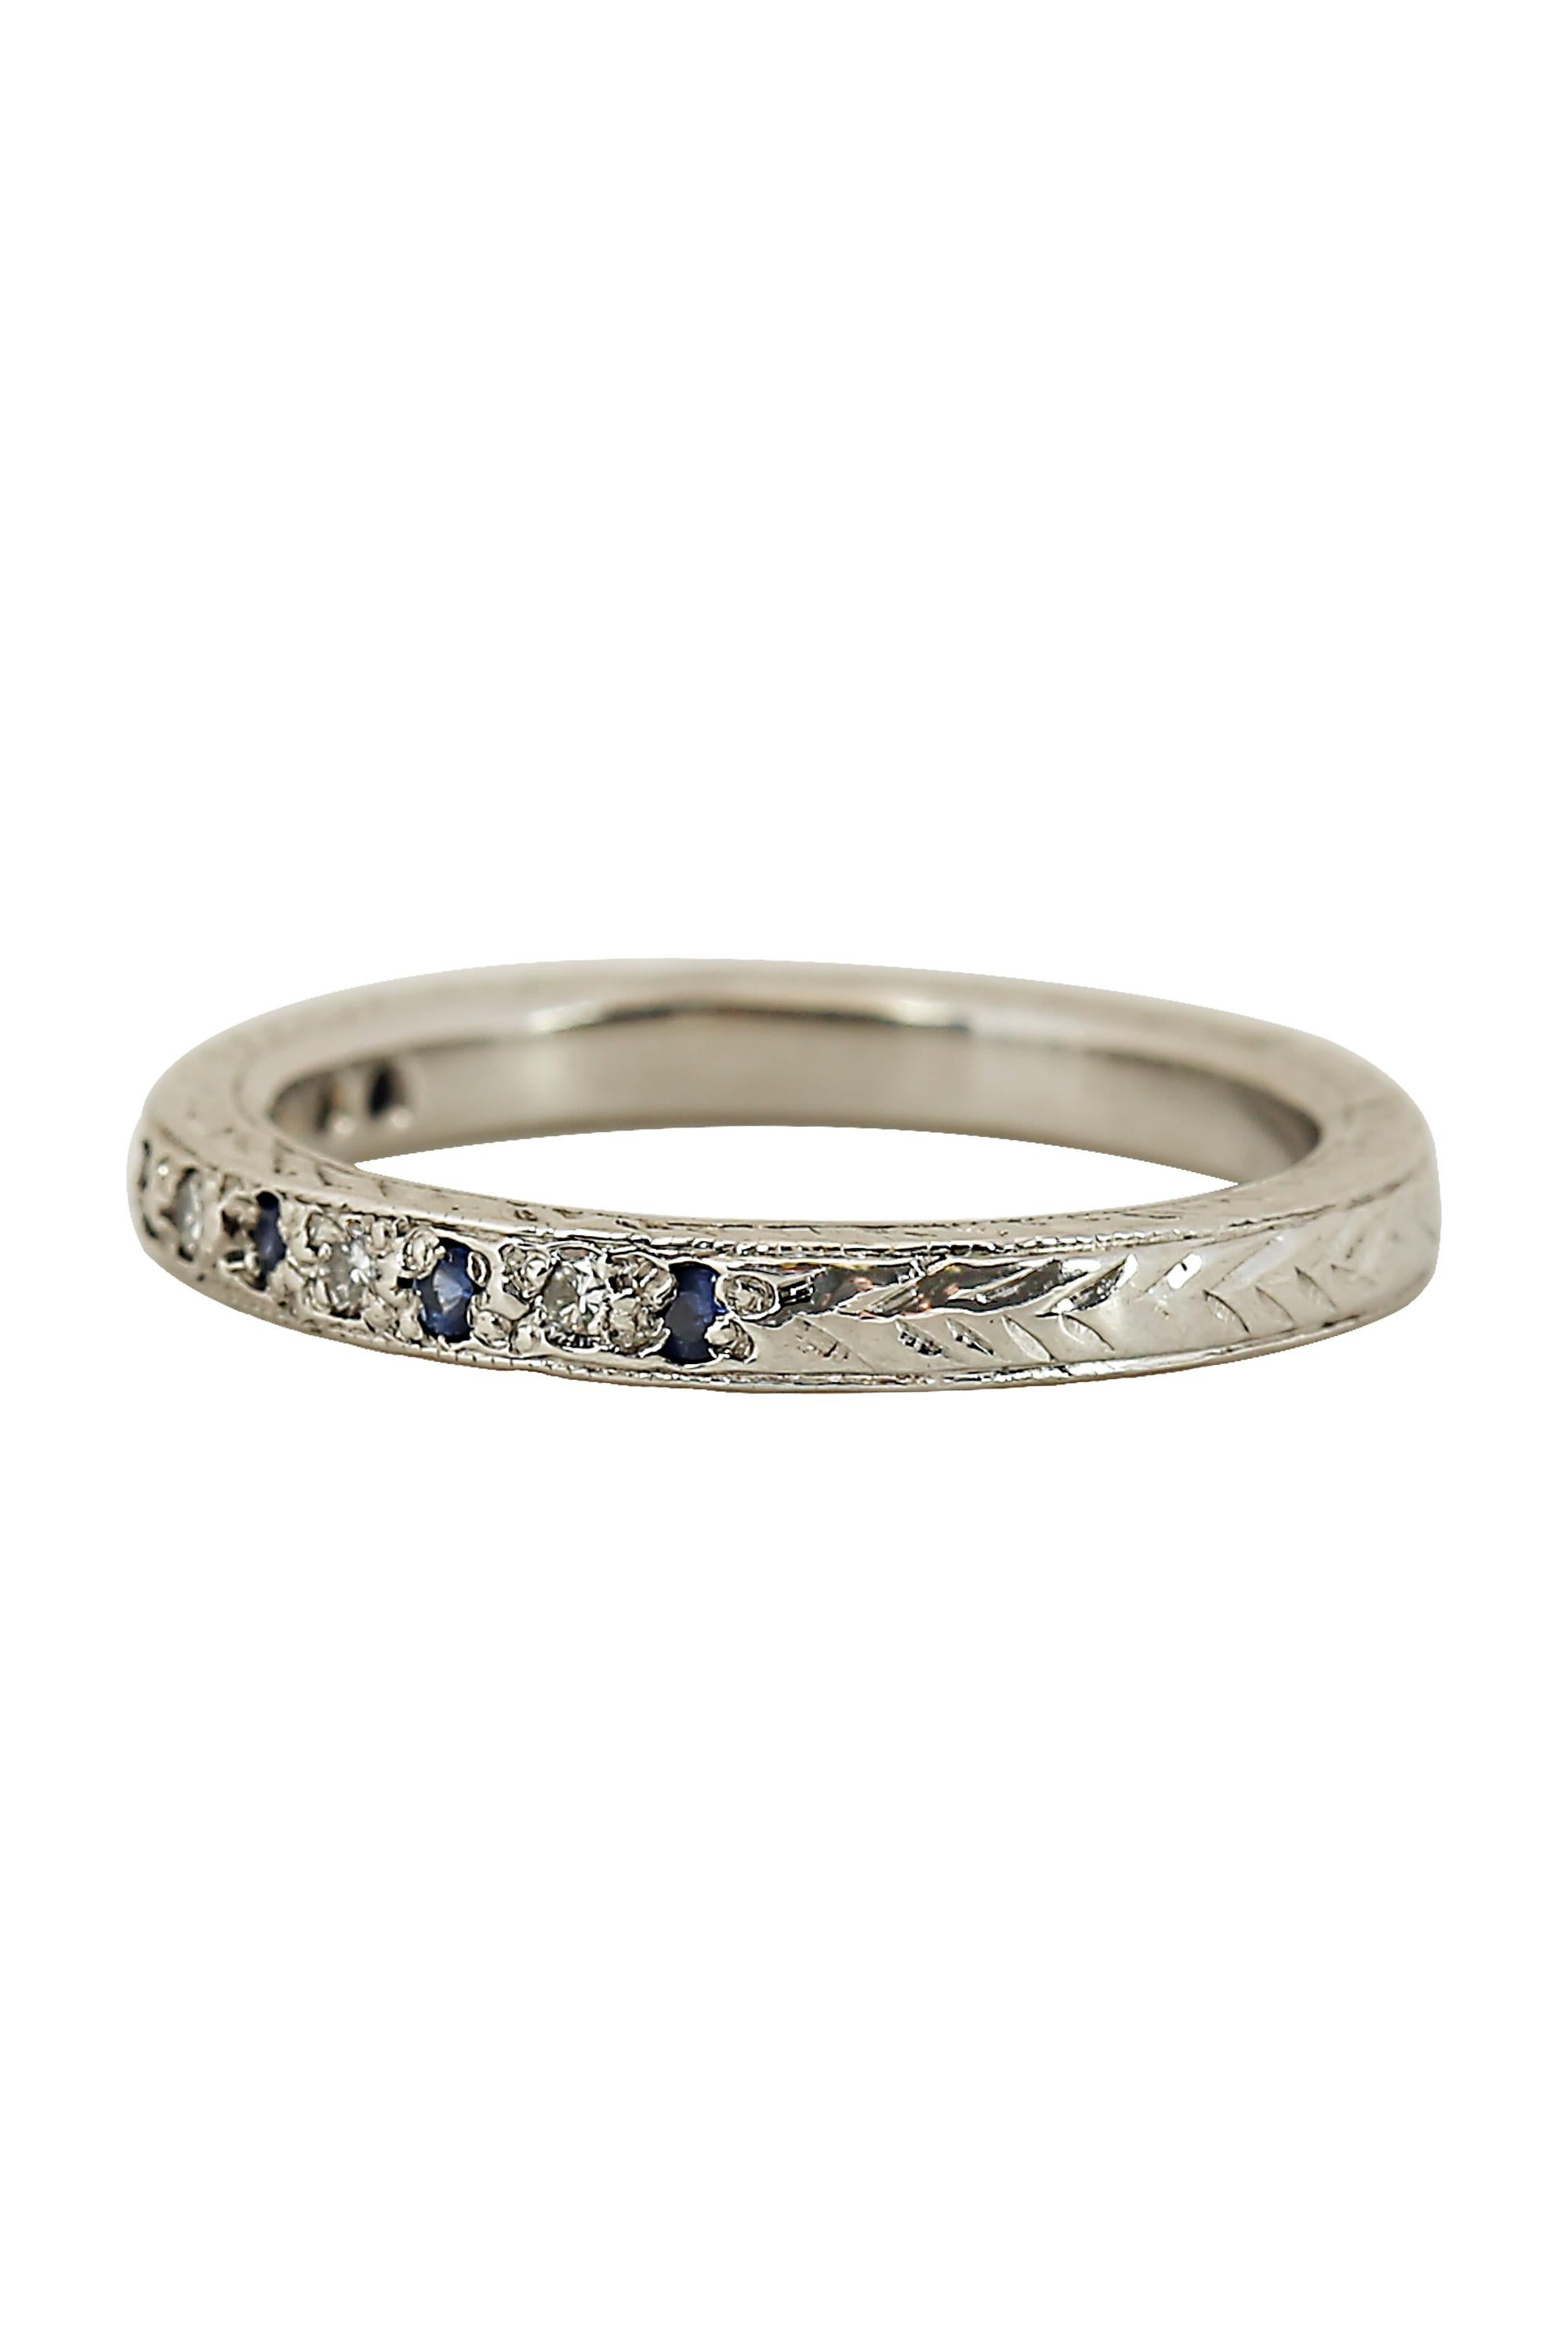 A lovely vintage band of alternating round sapphires and diamonds in a delicately engraved band. Total gemstone weight is .12 carat. Currently size 5.5.

